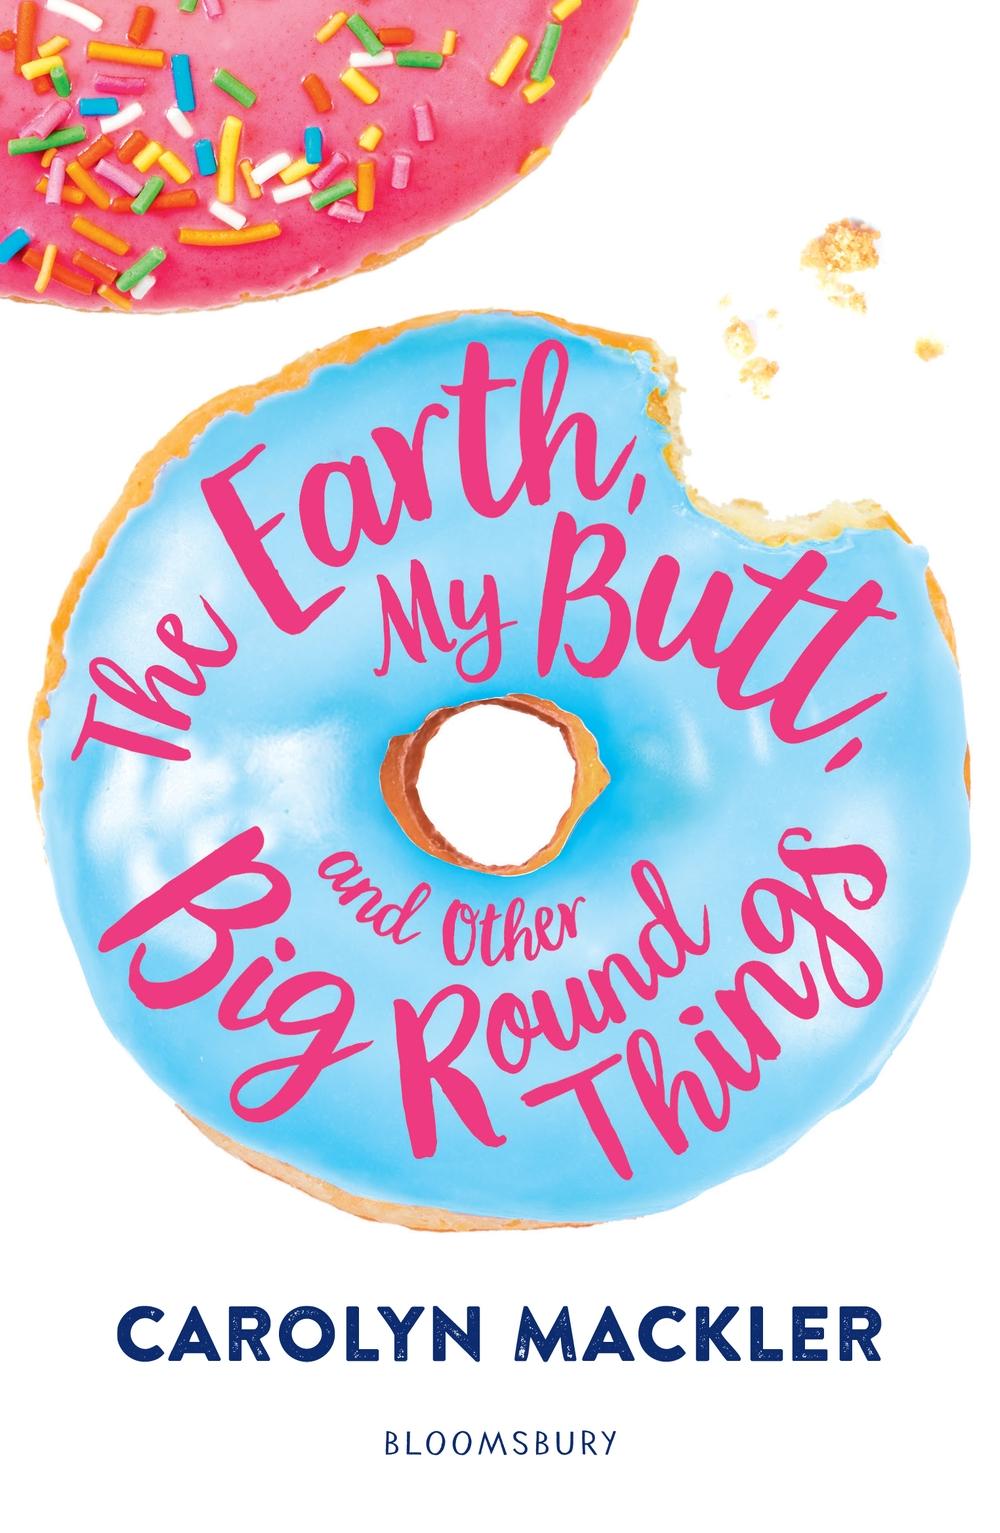 Earth, My Butt, and Other Big Round Things